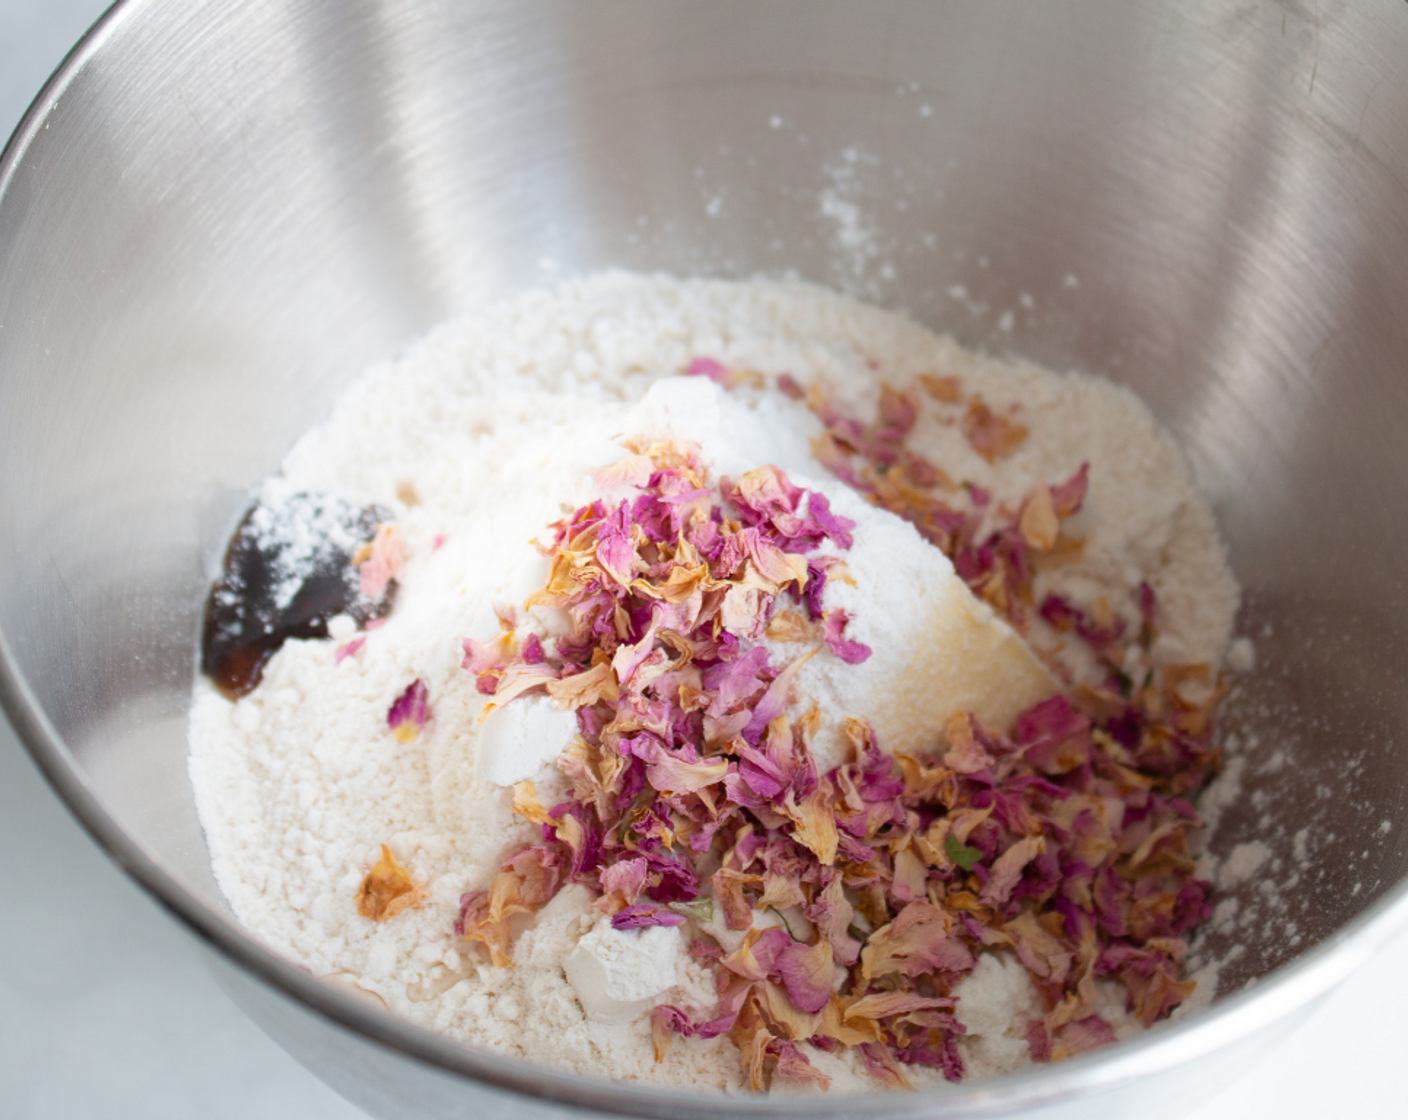 step 2 Add Unsalted Butter (1 cup), Granulated Sugar (2/3 cup), All-Purpose Flour (2 1/3 cups), Vanilla Extract (1/2 tsp), Rose Water (3/4 tsp), Salt (1/4 tsp), and Edible Dried Rose Petals (3 Tbsp) into a mixing bowl. Mix on low for 2 minutes until the mixture is a coarse crumbly texture. Add Heavy Cream (3 Tbsp) and mix for 30 seconds.